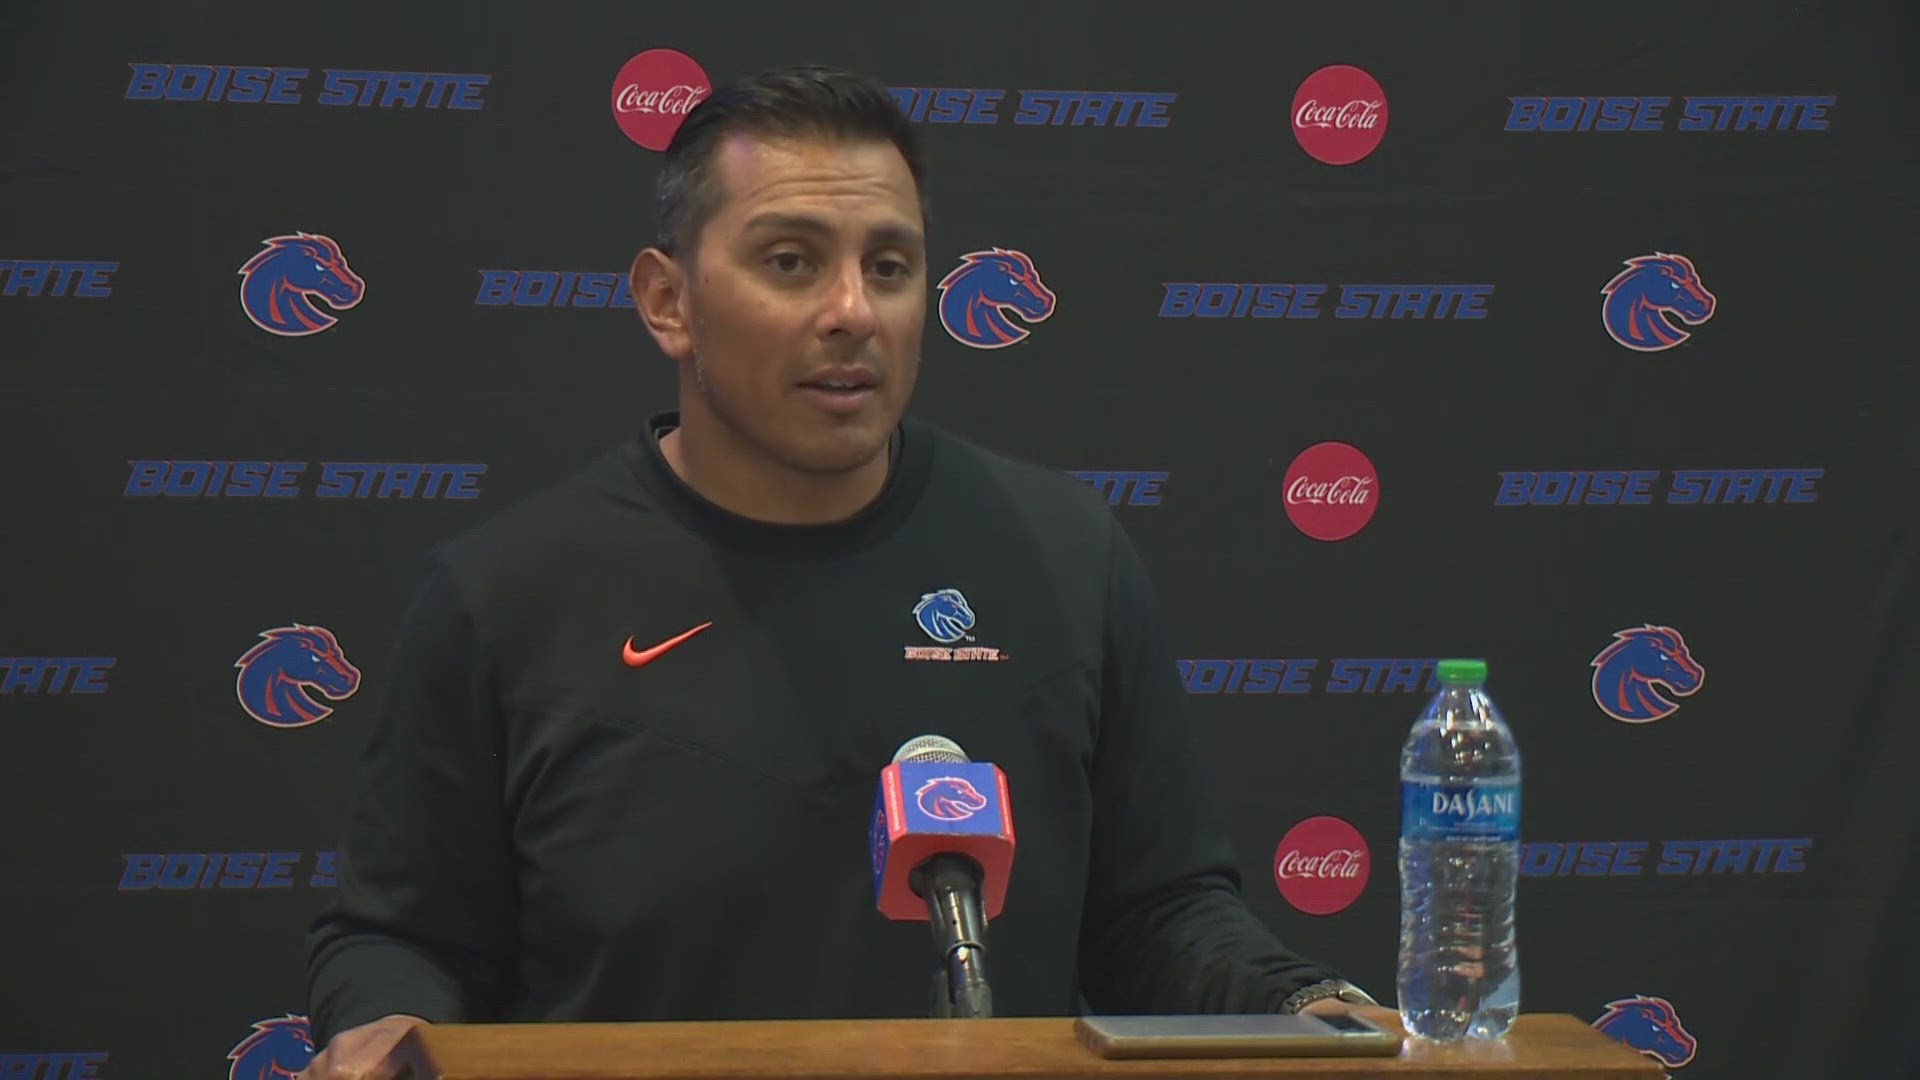 ICYMI: Head coach Andy Avalos on Monday discussed Boise State's first Mountain West game at San Diego State and shared takeaways from the win over North Dakota.